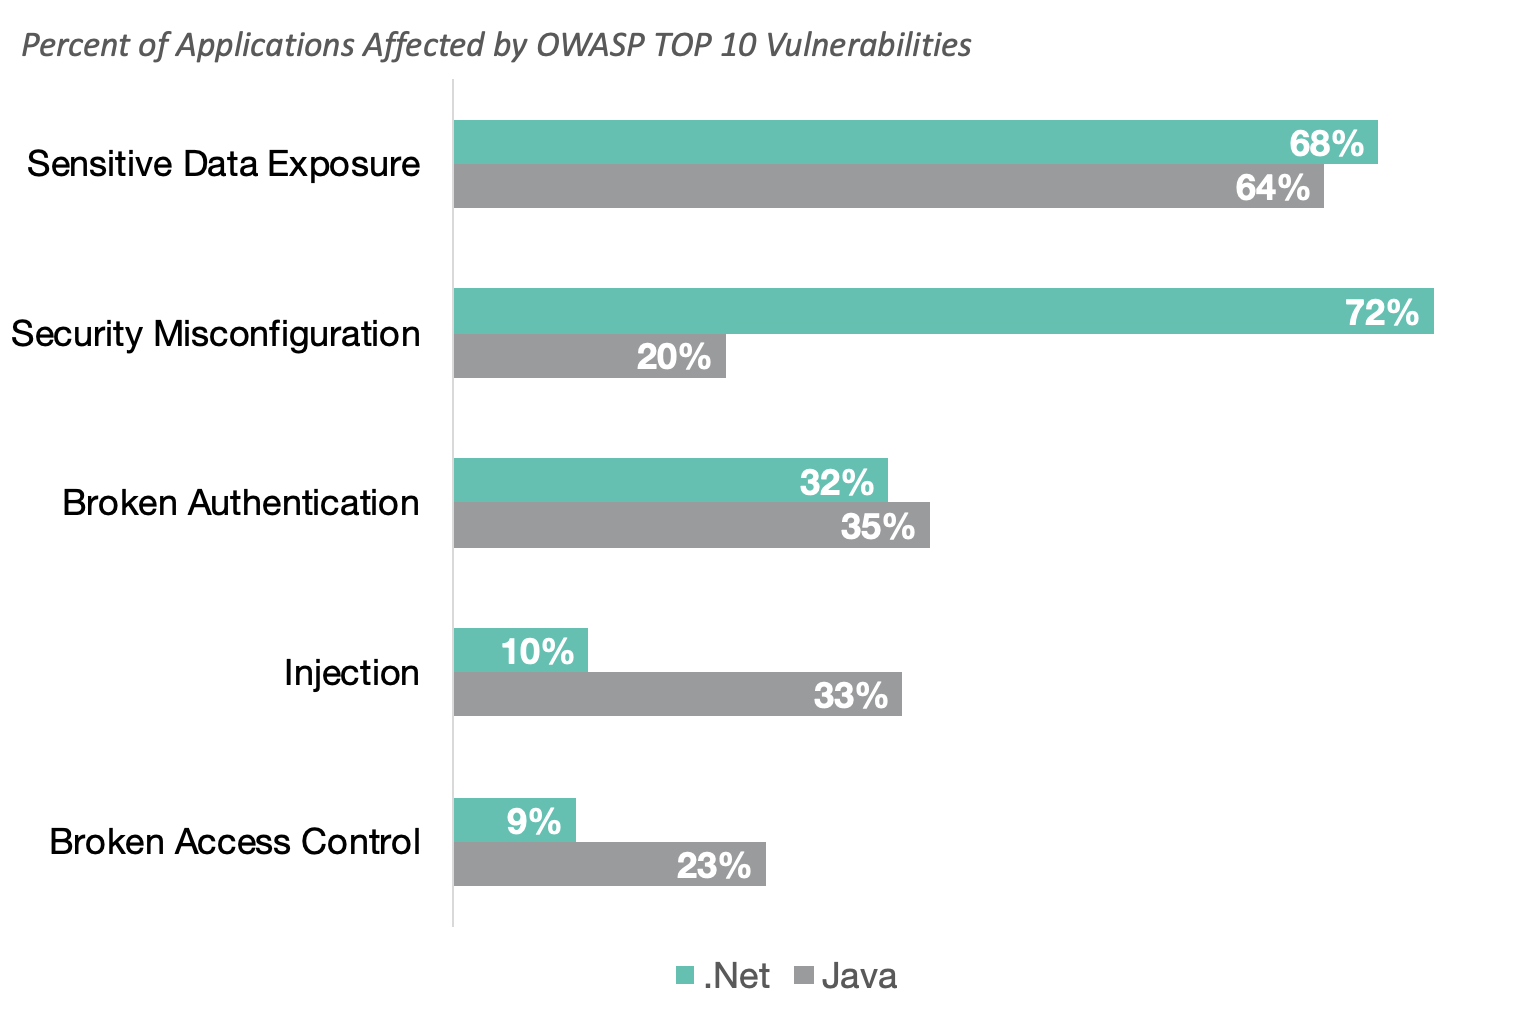 Footpad Cater Besiddelse Two Years After the Release of the 2017 OWASP Top Ten, Limited Improvements  Shown